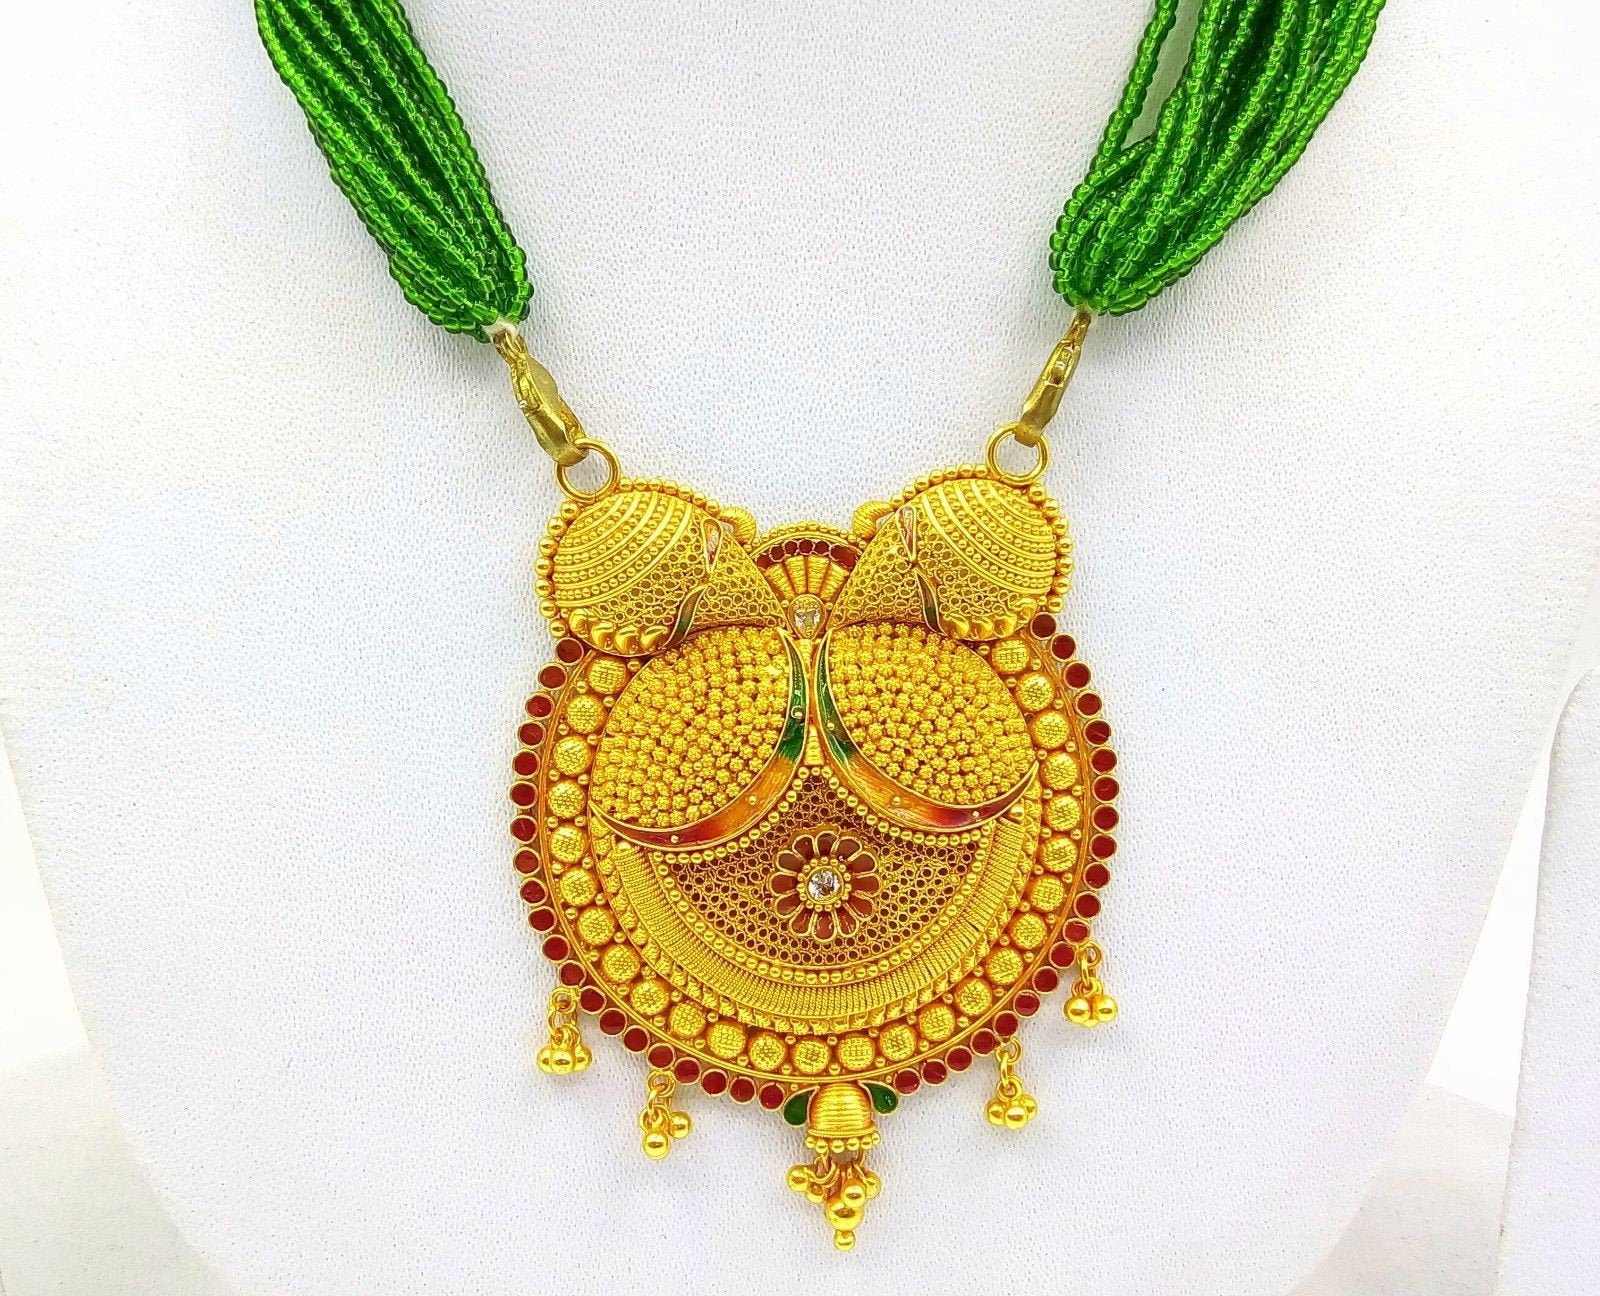 Vintage antique handmade 22k yellow gold filigree work fabulous pendant necklace with awesome meenakari (color enamel ) design mangalsutra - TRIBAL ORNAMENTS